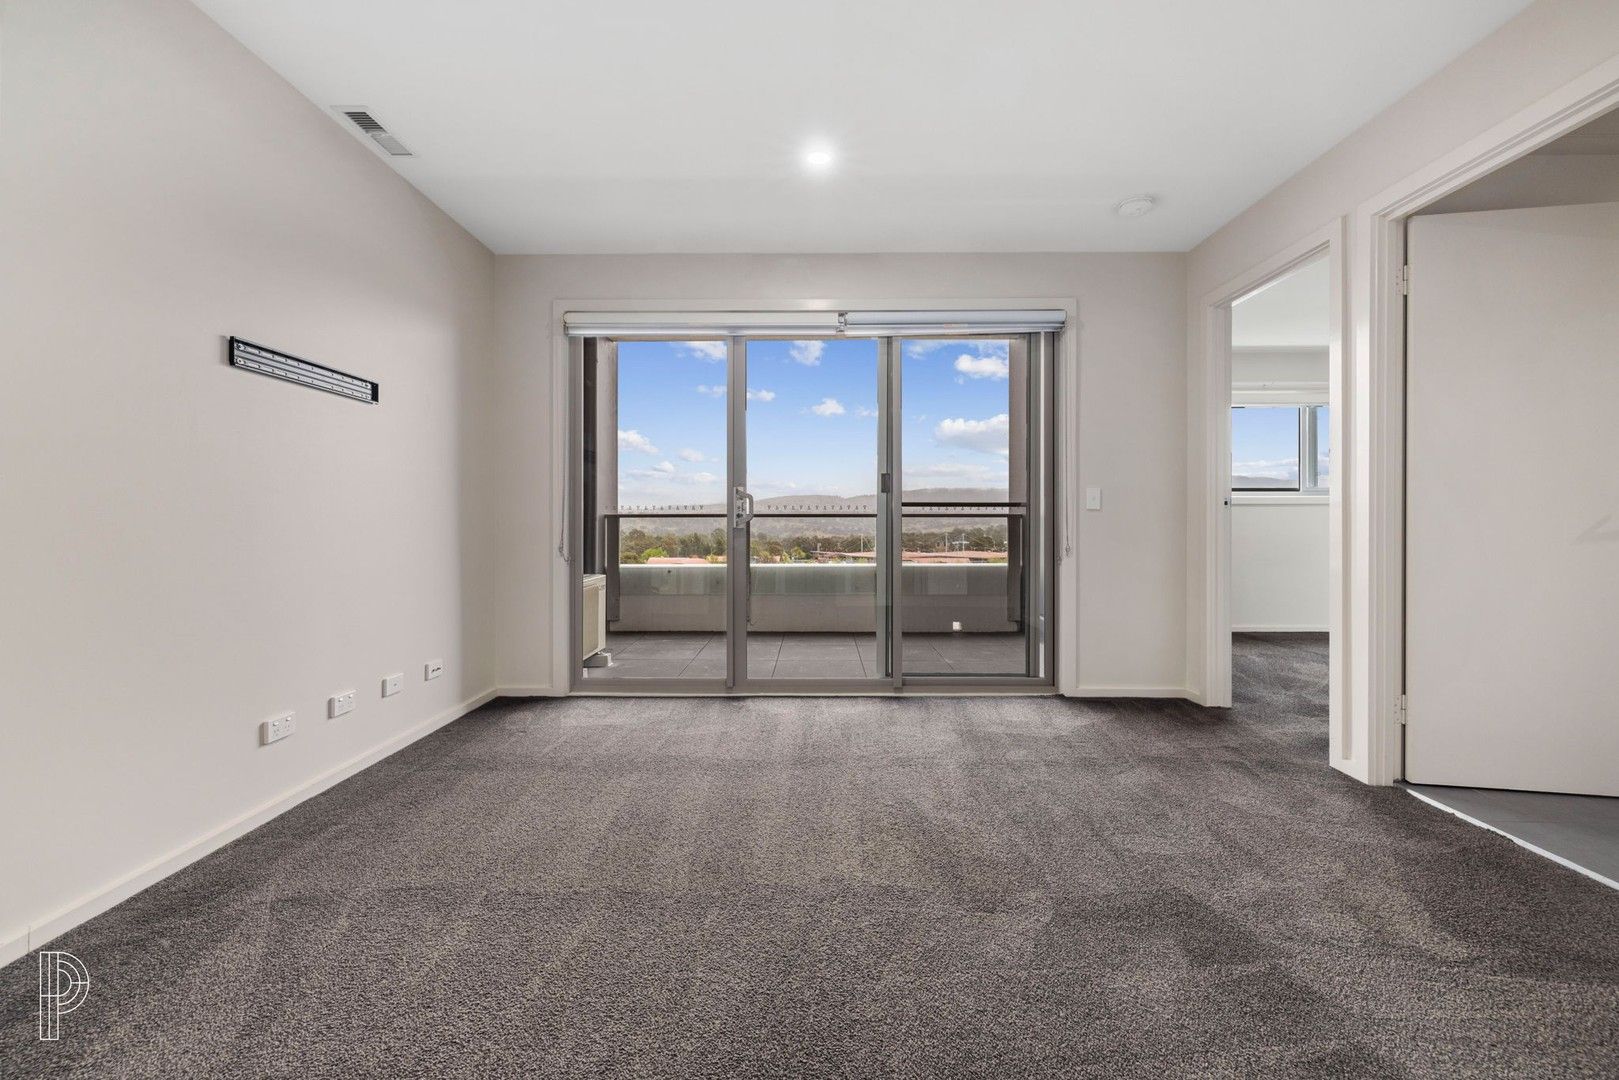 299/325 Anketell Street, Greenway ACT 2900, Image 0